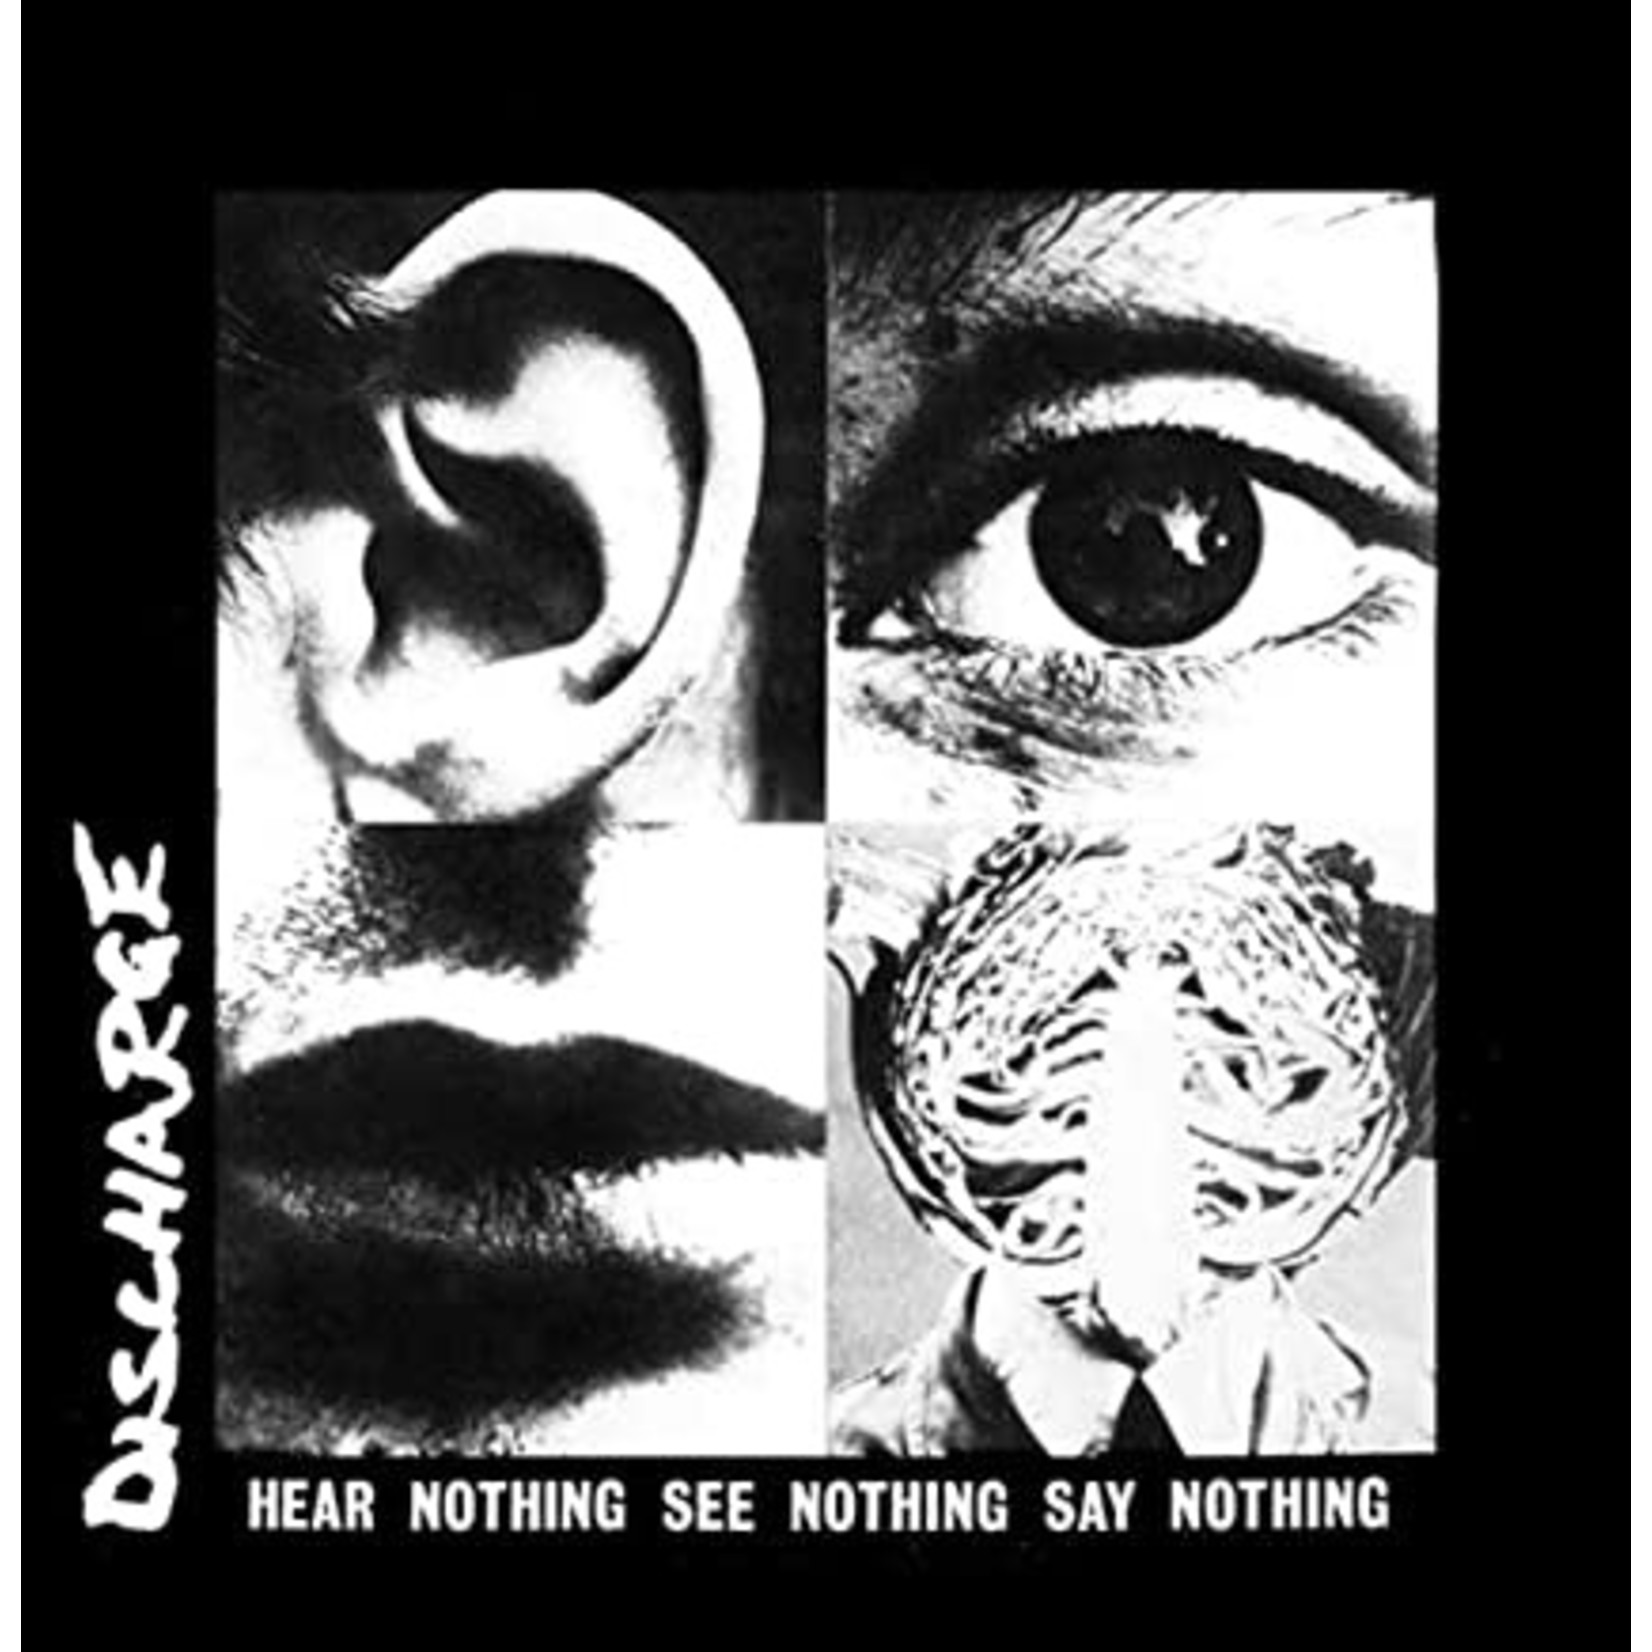 [New] Discharge - Hear Nothing See Nothing Say Nothing (white vinyl)